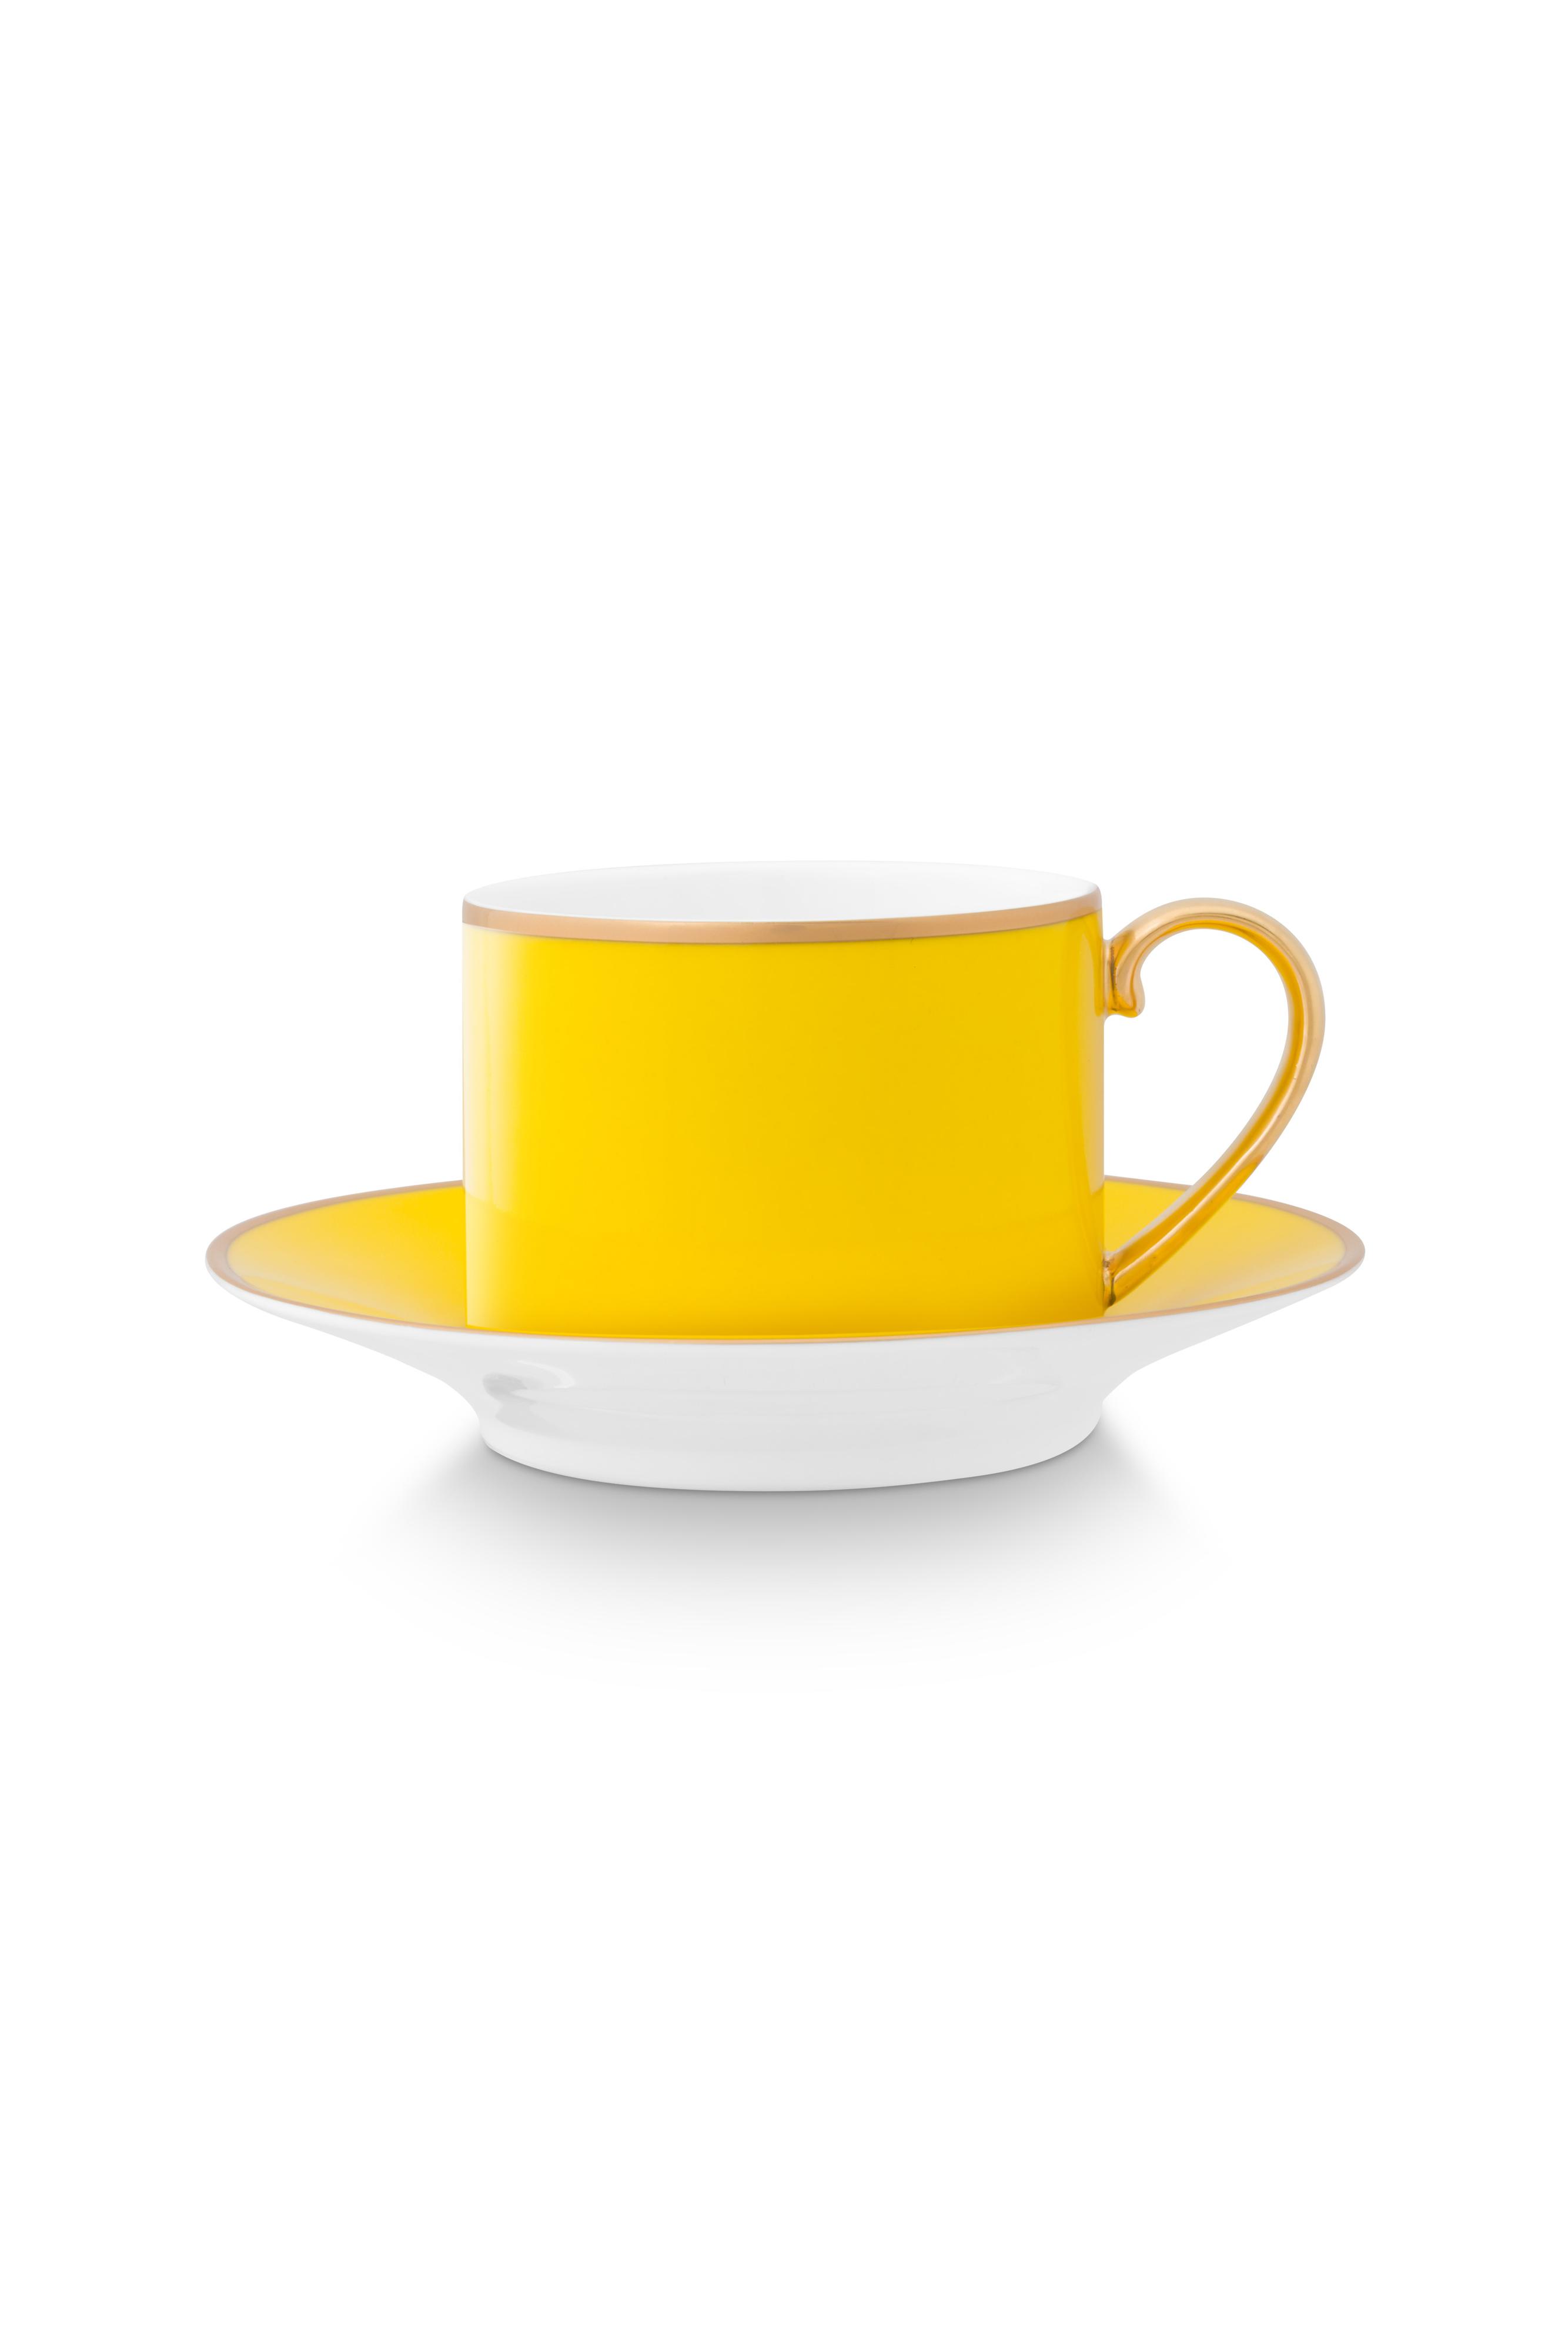 Cup - Saucer Pip Chique Gold-yellow 220ml Gift